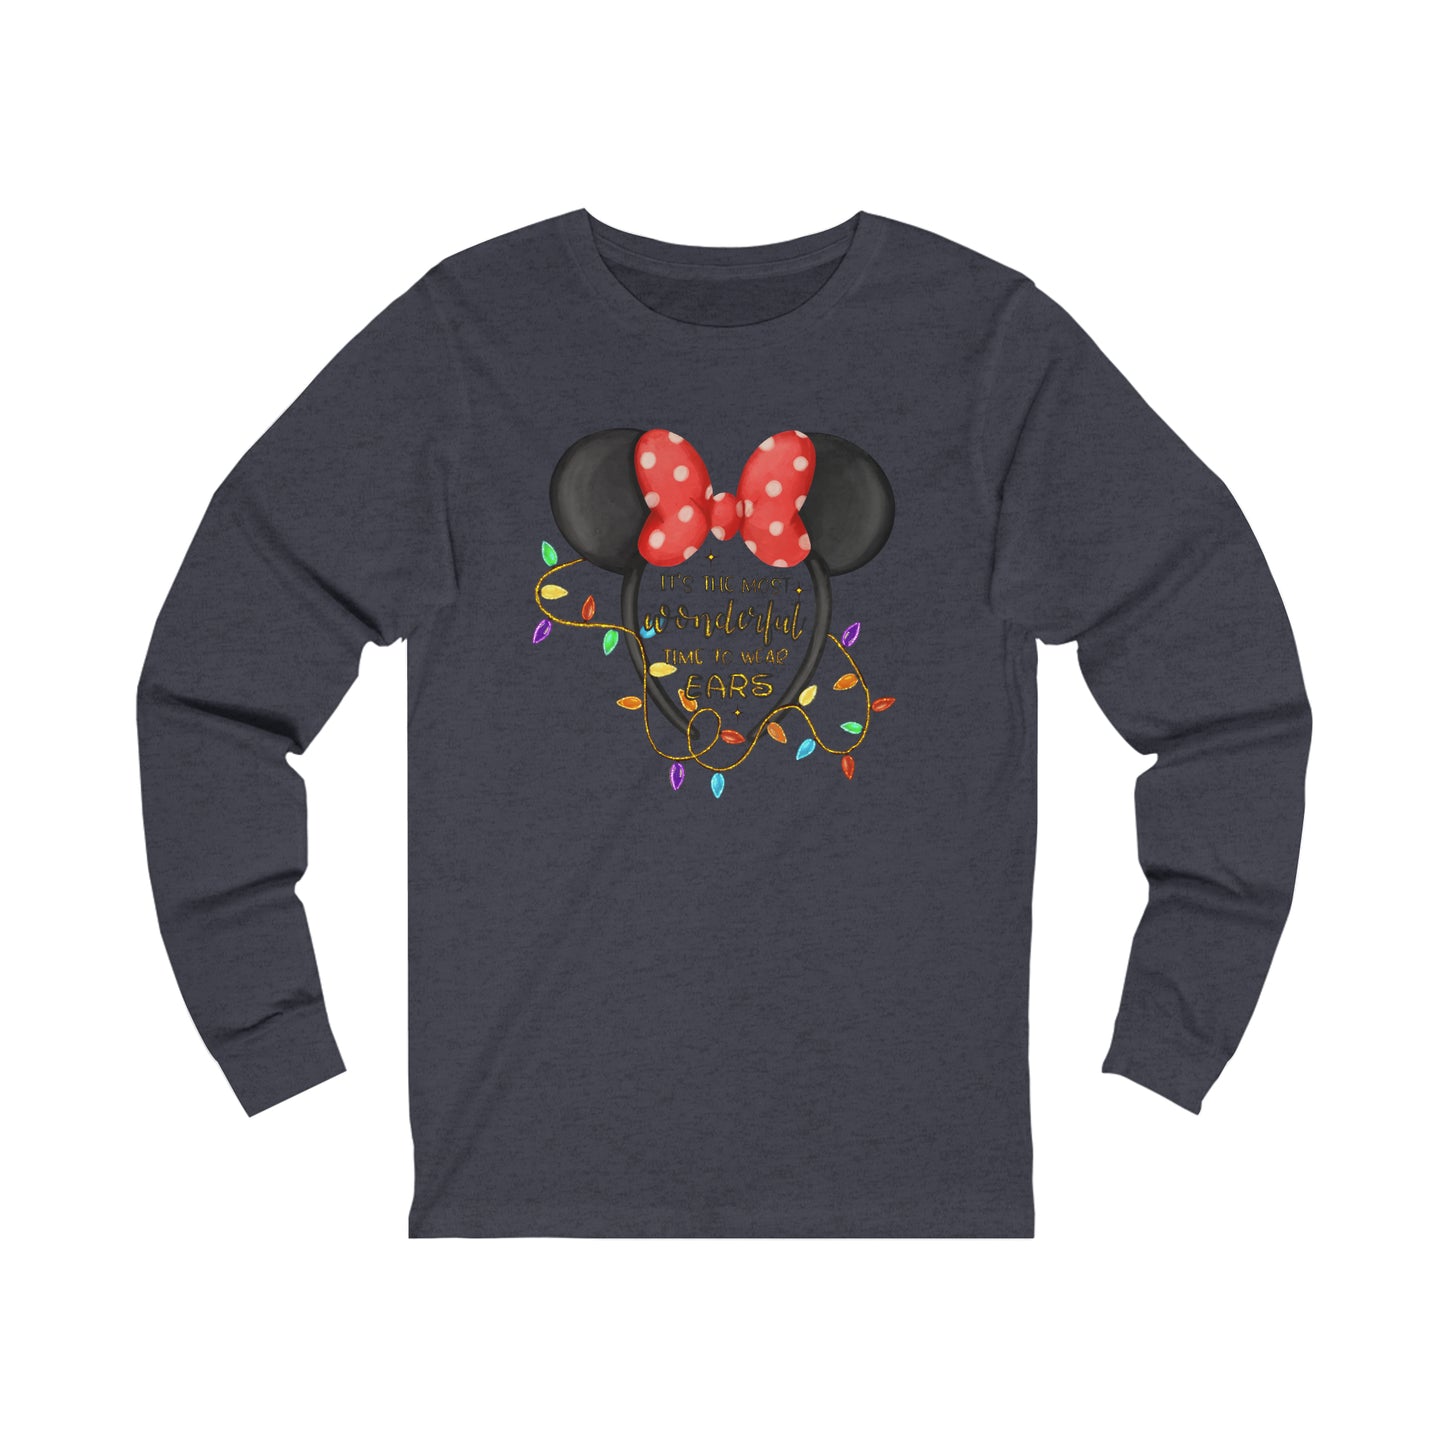 It's The Most Magical Time To Wear Ears Unisex Long Sleeve Graphic Tee